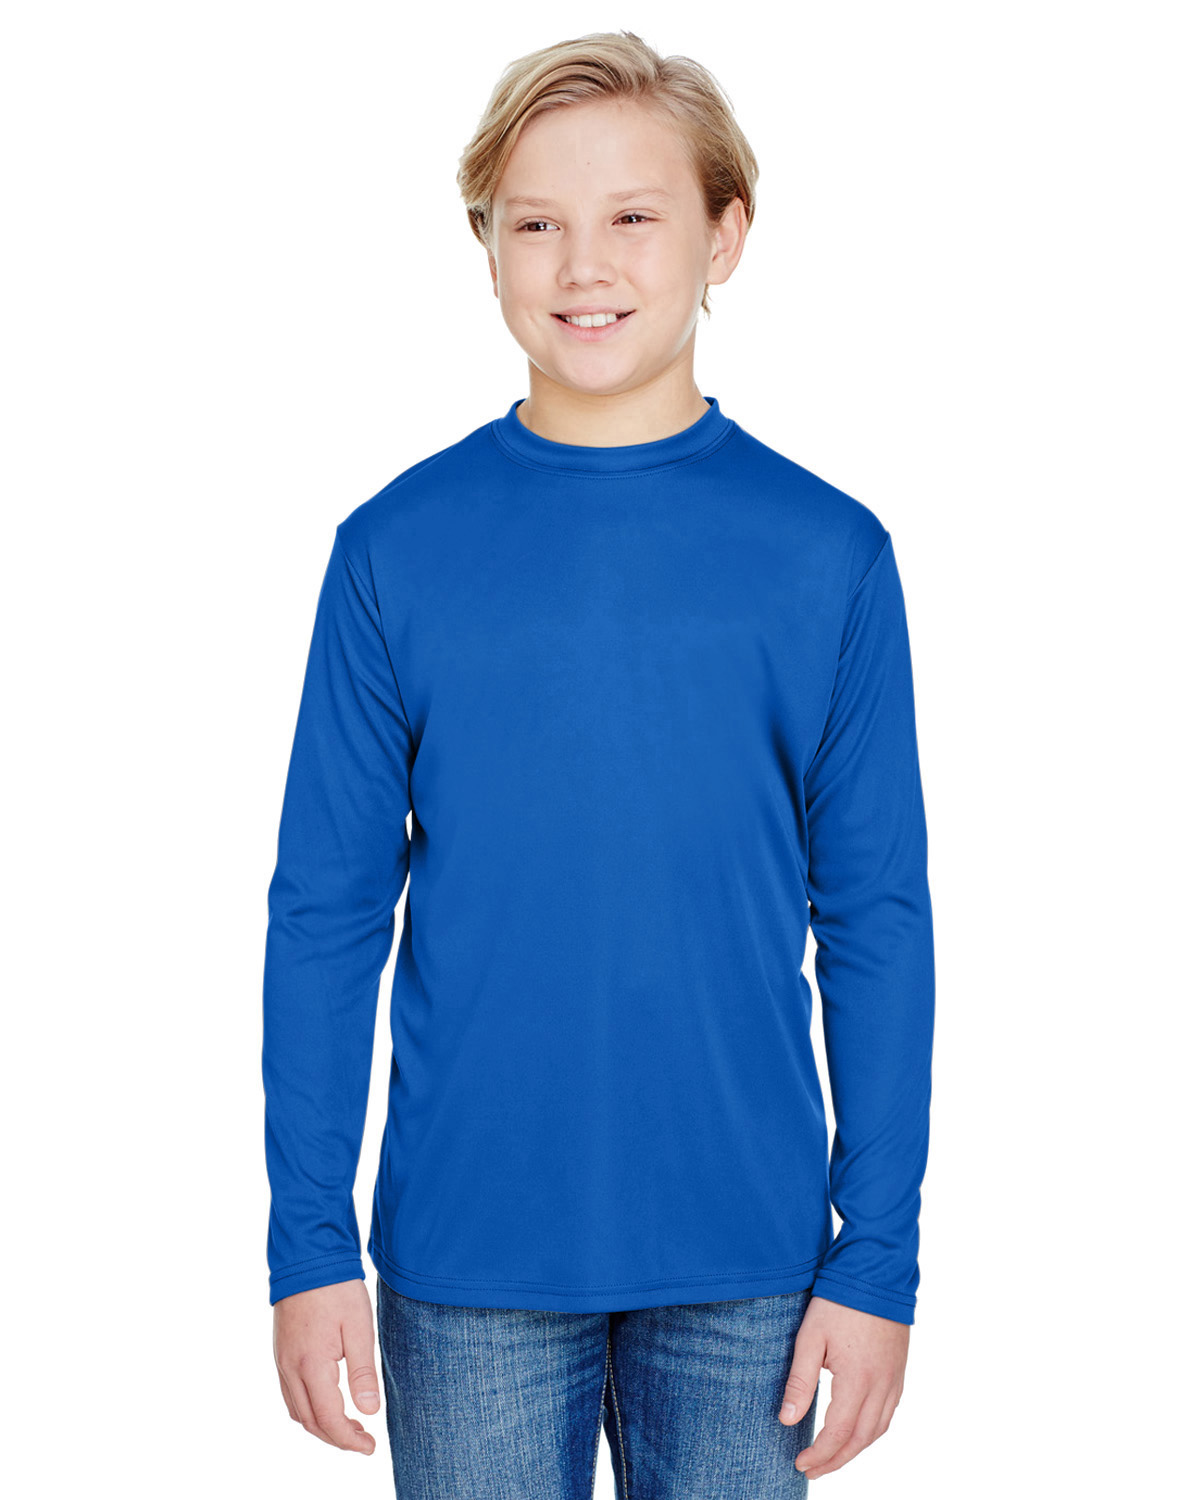 NB3165 A4 Youth Long Sleeve Cooling Performance Crew Shirt